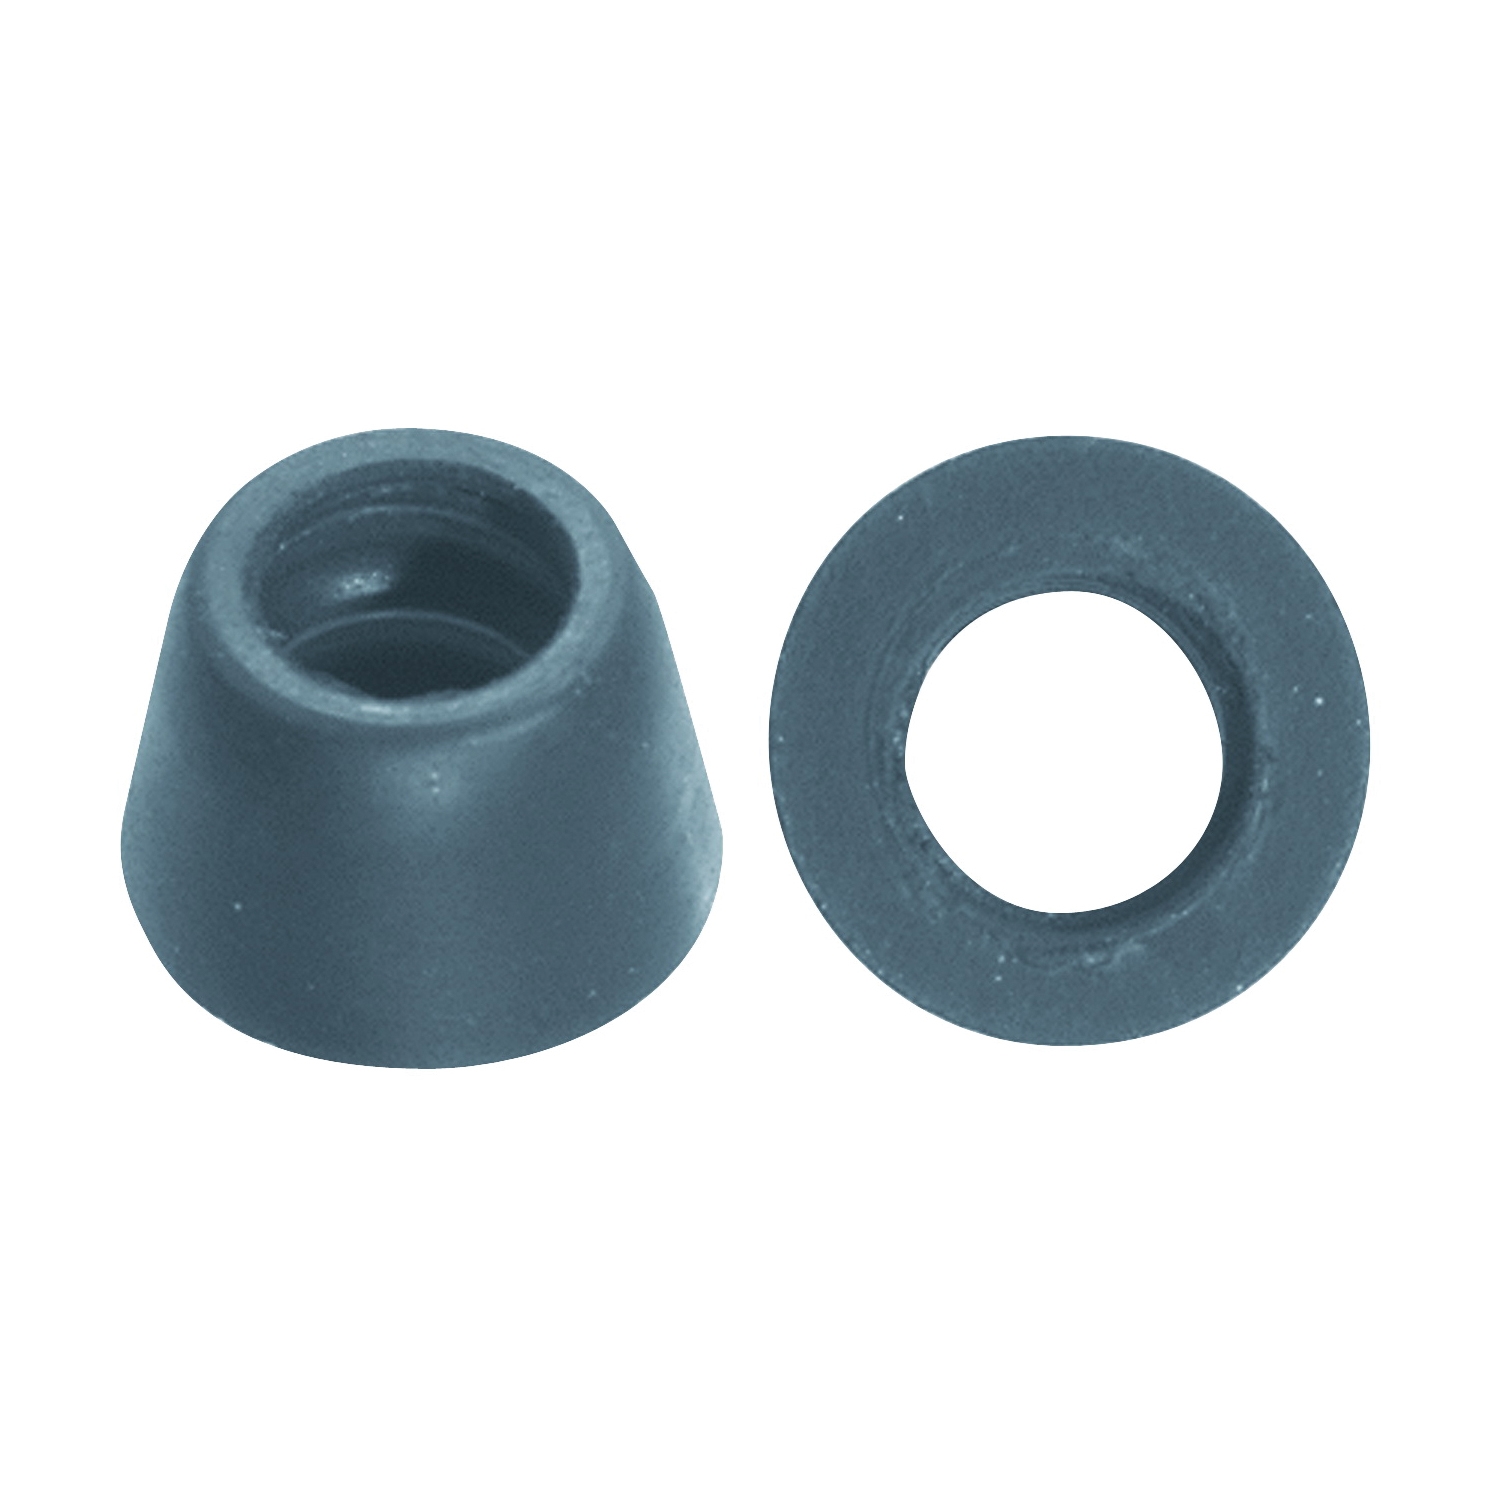 Danco 36668B Faucet Washer, 13/32 in, 21/32 in Dia, Rubber, For: 1/2 in IPS Threaded Basin Supply - 1